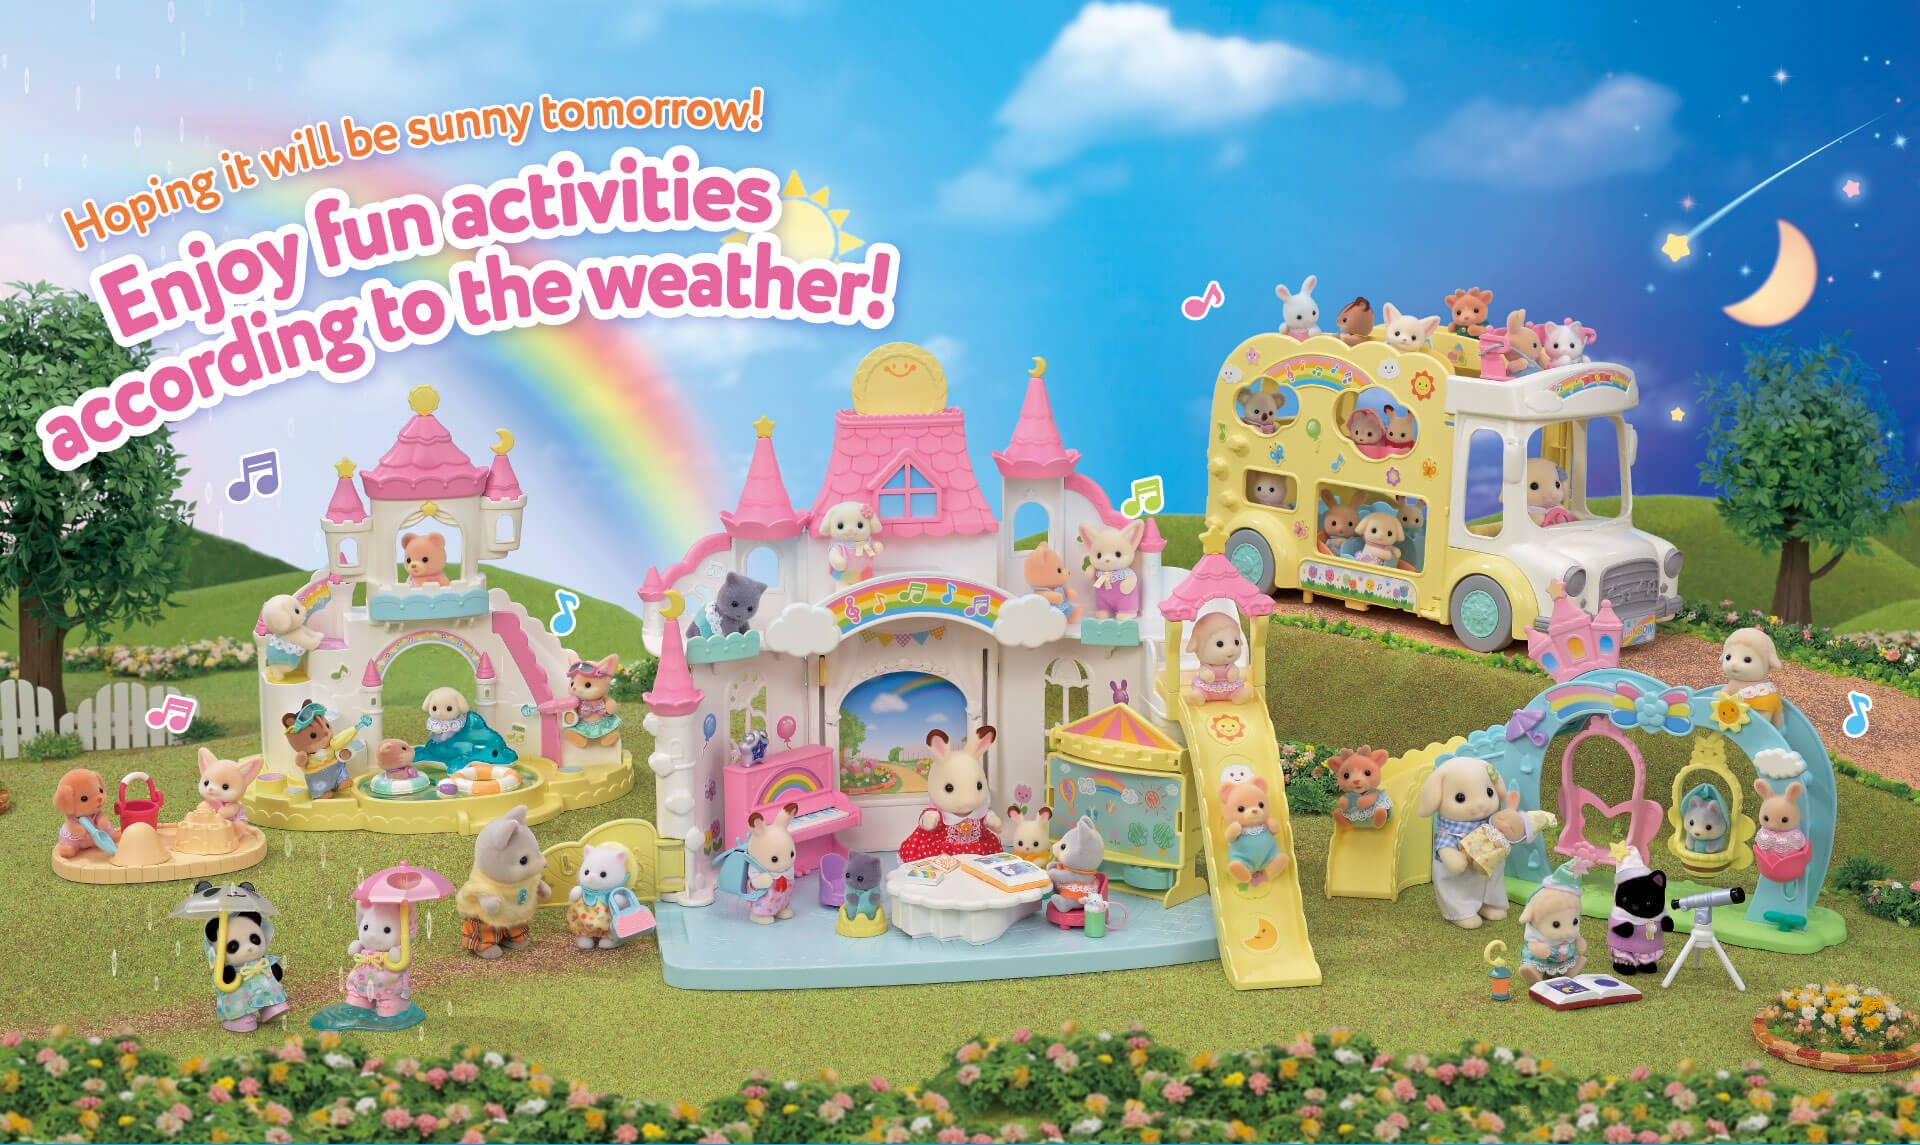 The Sunny Castle Nursery of The Calico Critters' Nursery Series. Let's enjoy fun activities according to the weather!